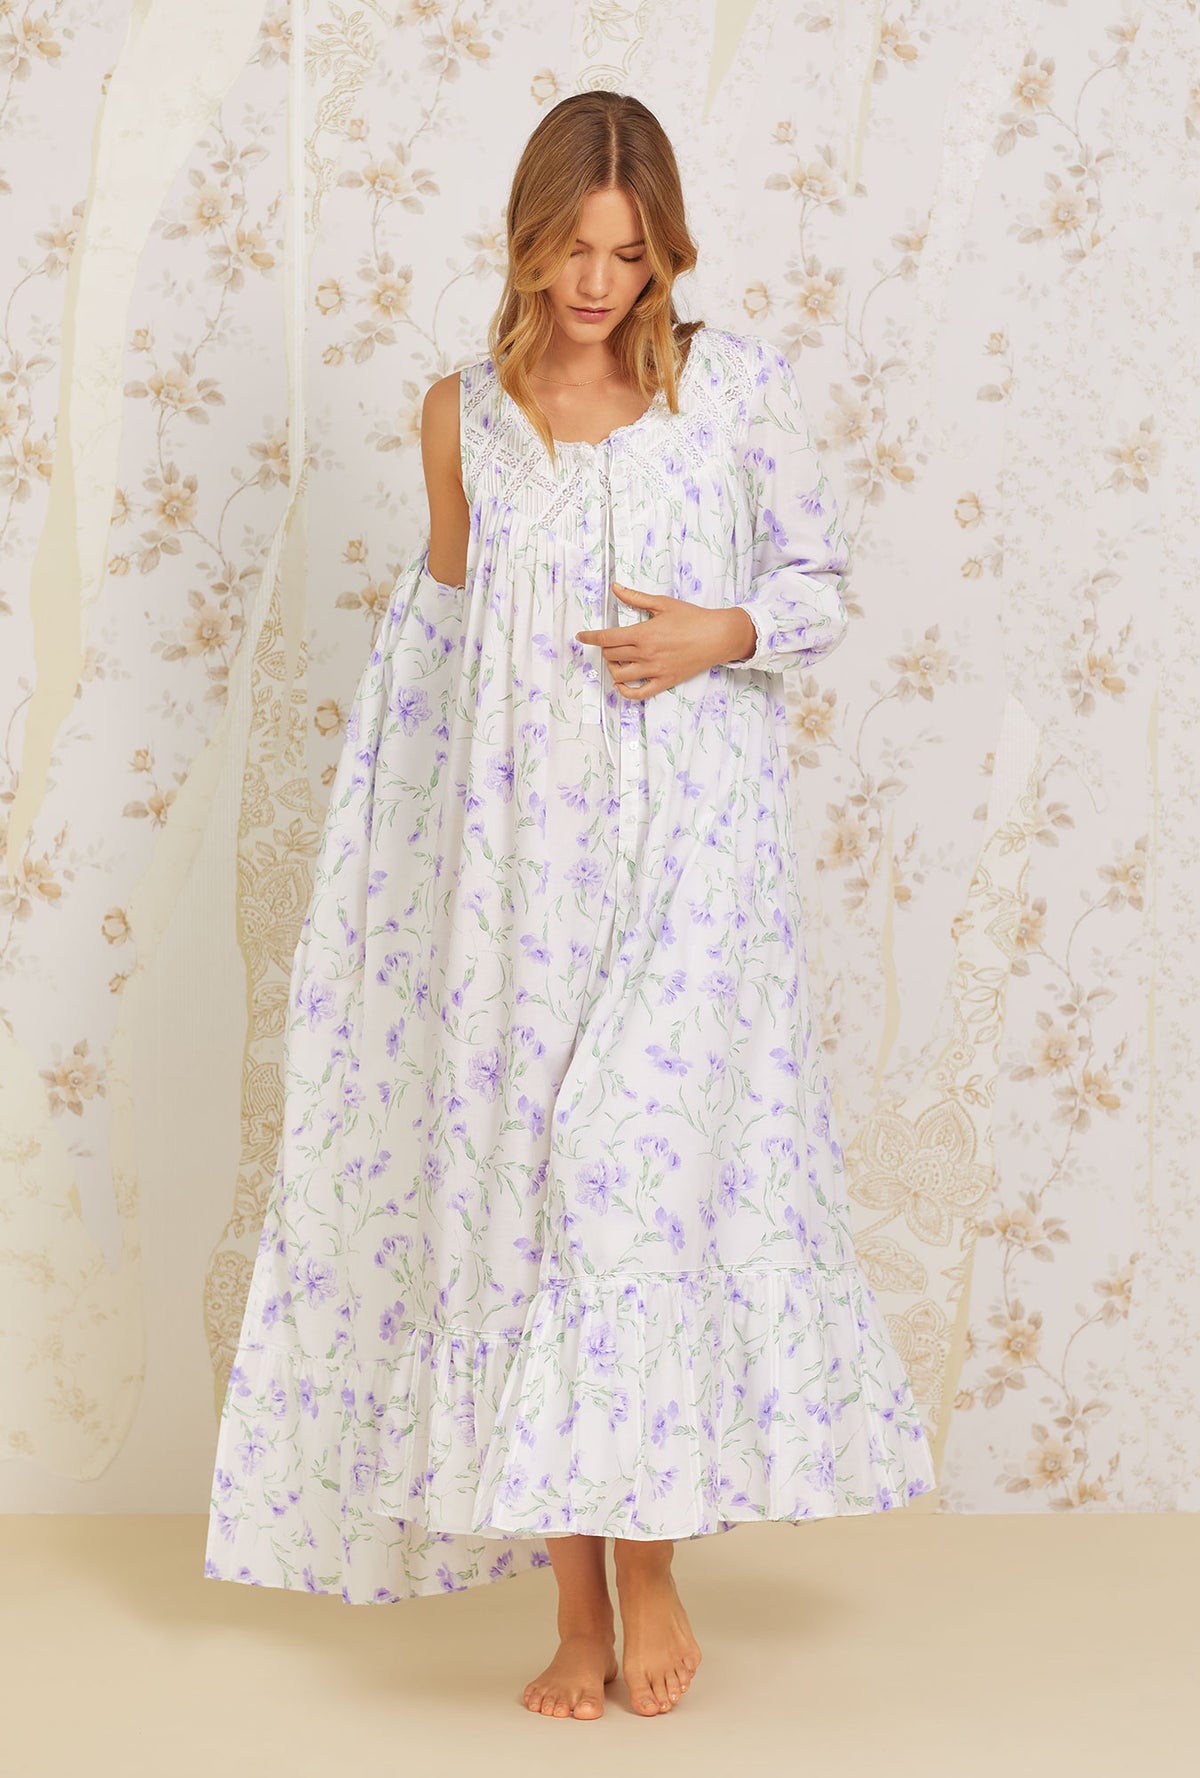 A lady wearing white  sleeveless  Cotton Nightgown with Lilac Carnation  print